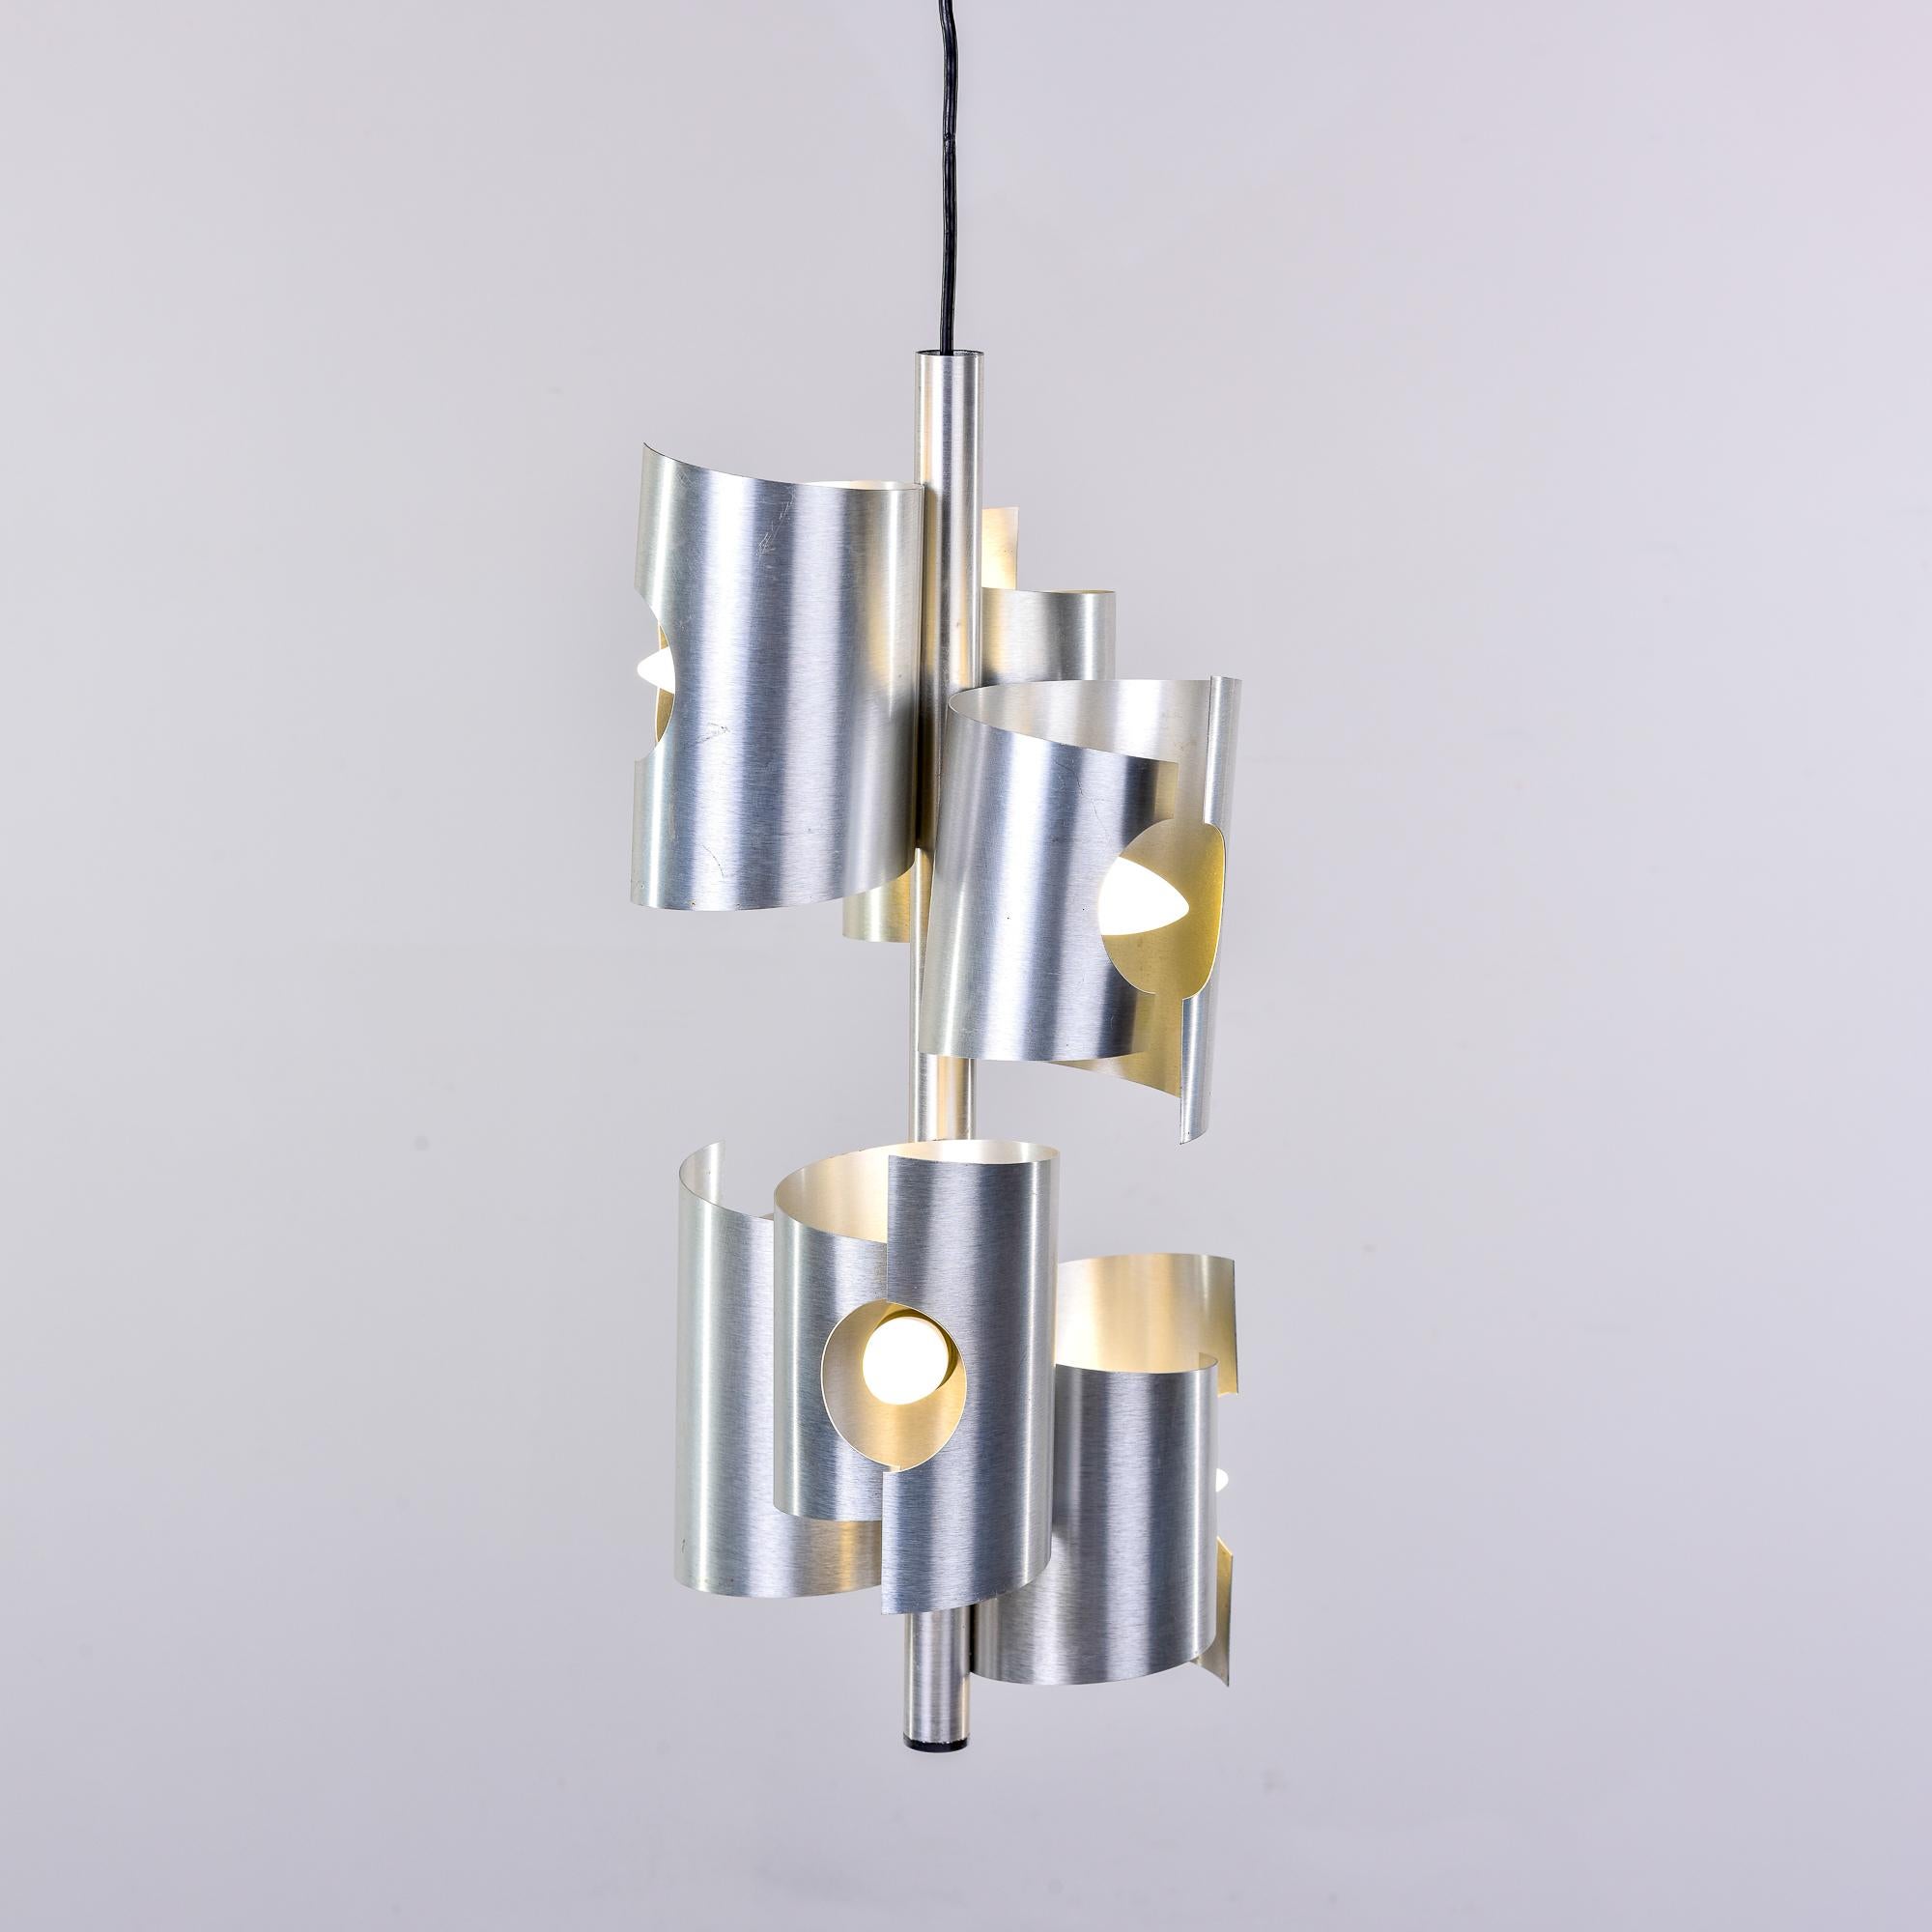 Found in Italy, this circa 1960s hanging pendant has two tiers of three staggered aluminum tubes with cut outs for the bulbs. Six lights in total with standard sized sockets. Fixture has been rewired for US electrical standards. Smaller pendant in